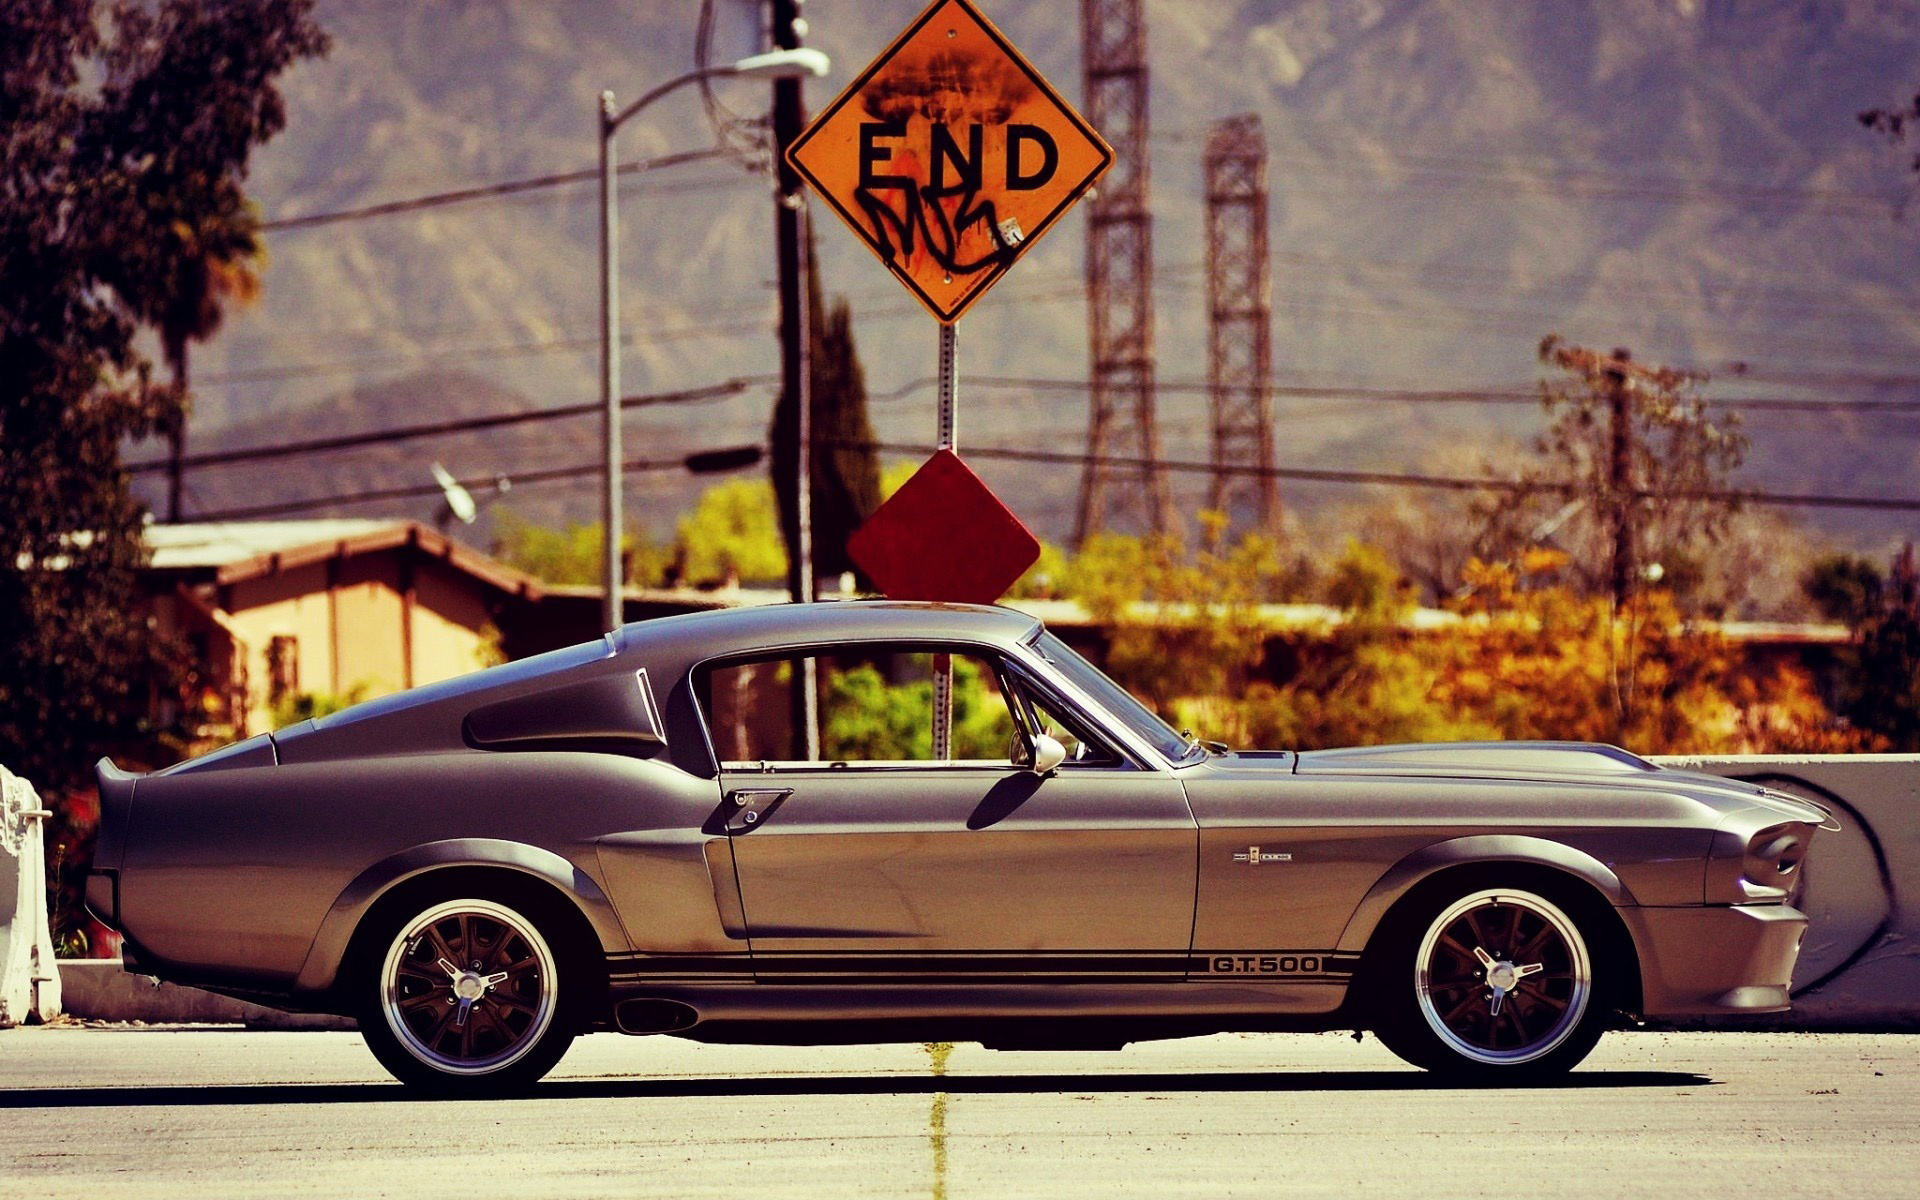 Side view Eleanor, GT500 in motion, Historic Mustang, American car classic, Shelby presence, 1920x1200 HD Desktop